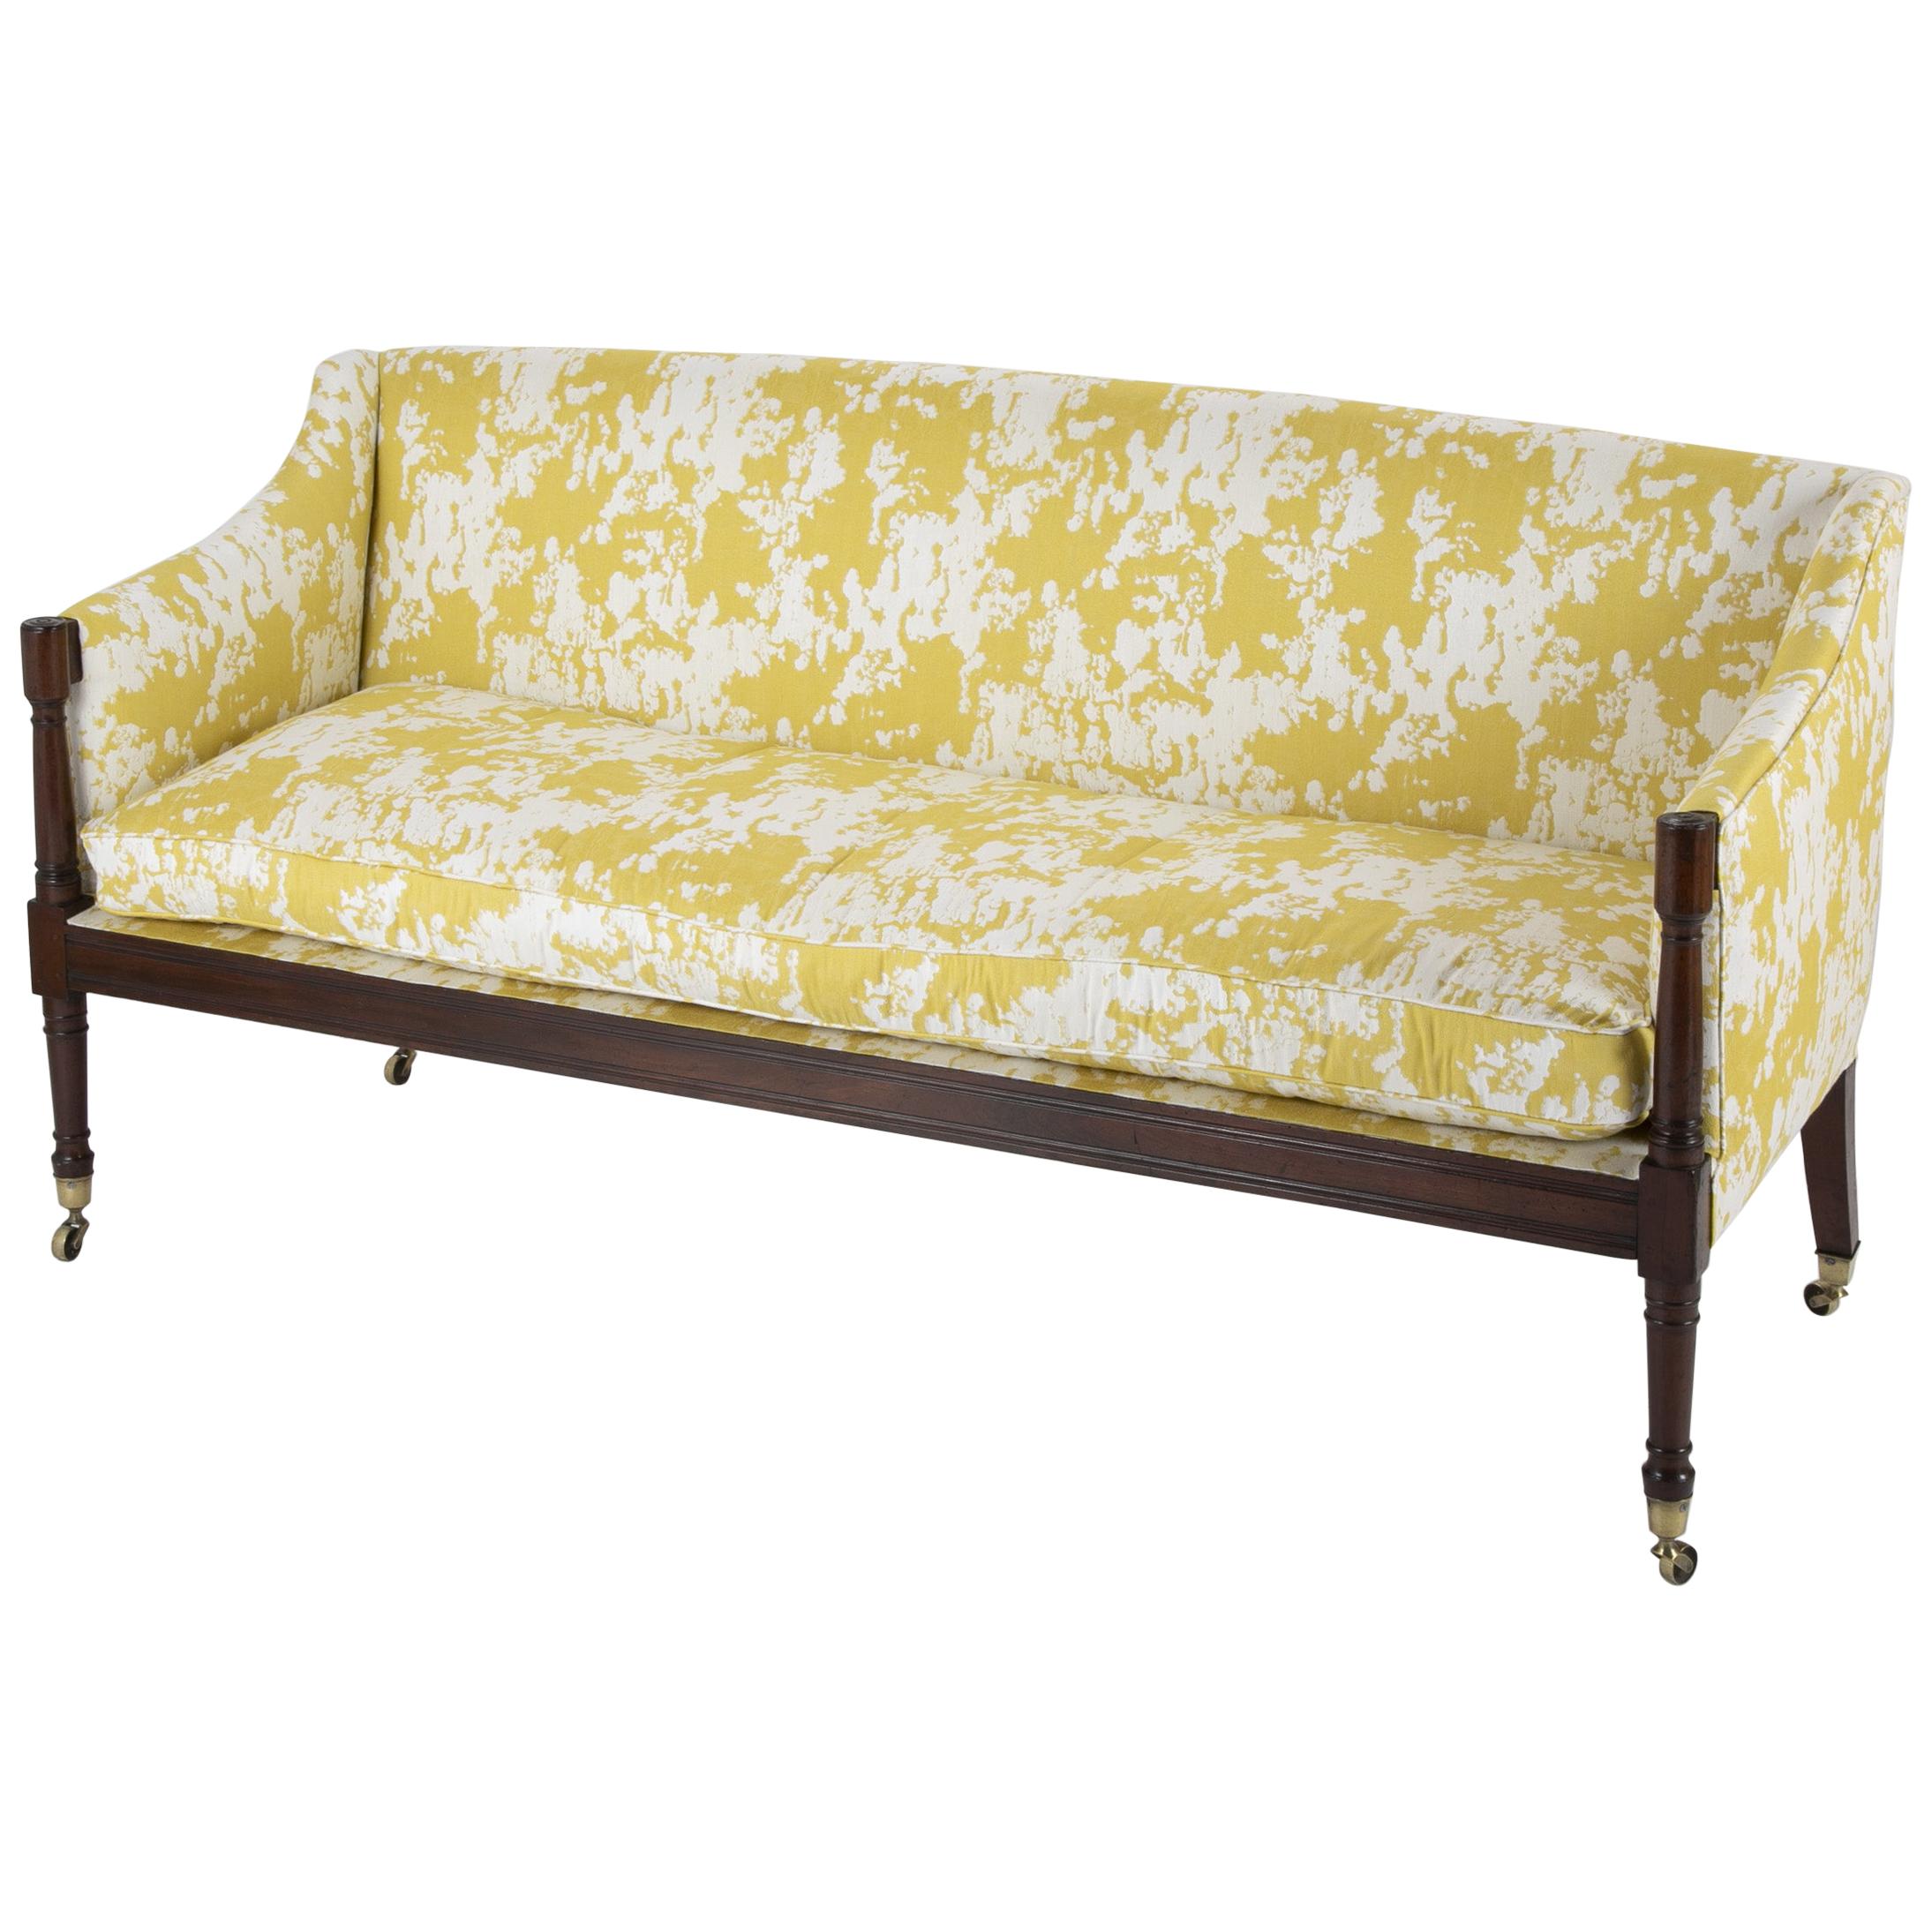 Federal American Sofa with Updated Fabric